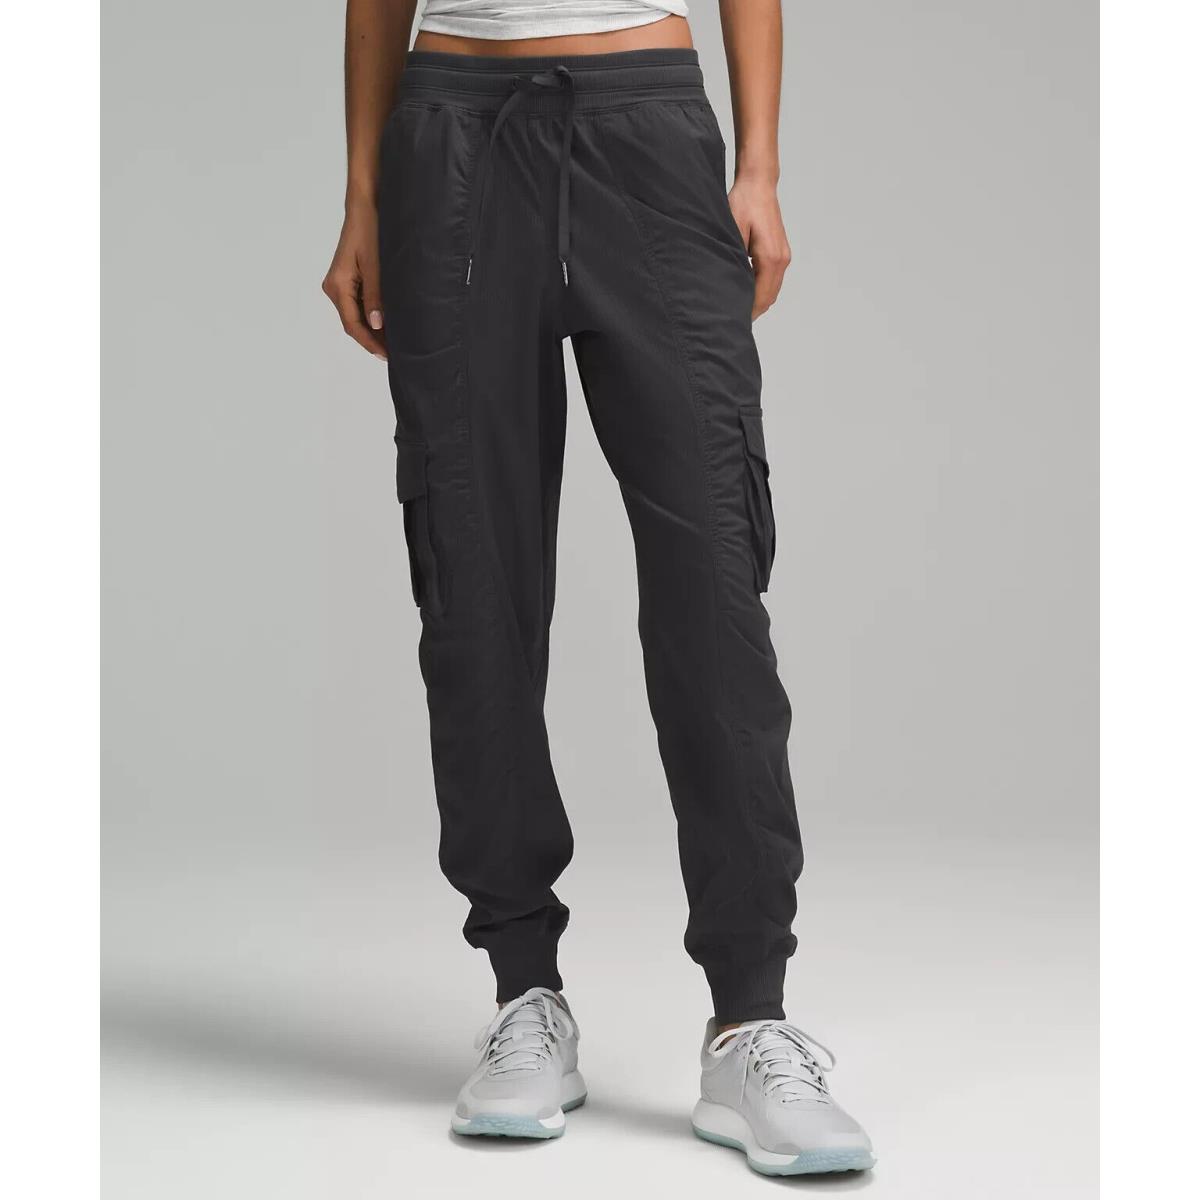 Lululemon Dance Studio Relaxed-fit Mid-rise Cargo Jogger Graphite Grey Size M